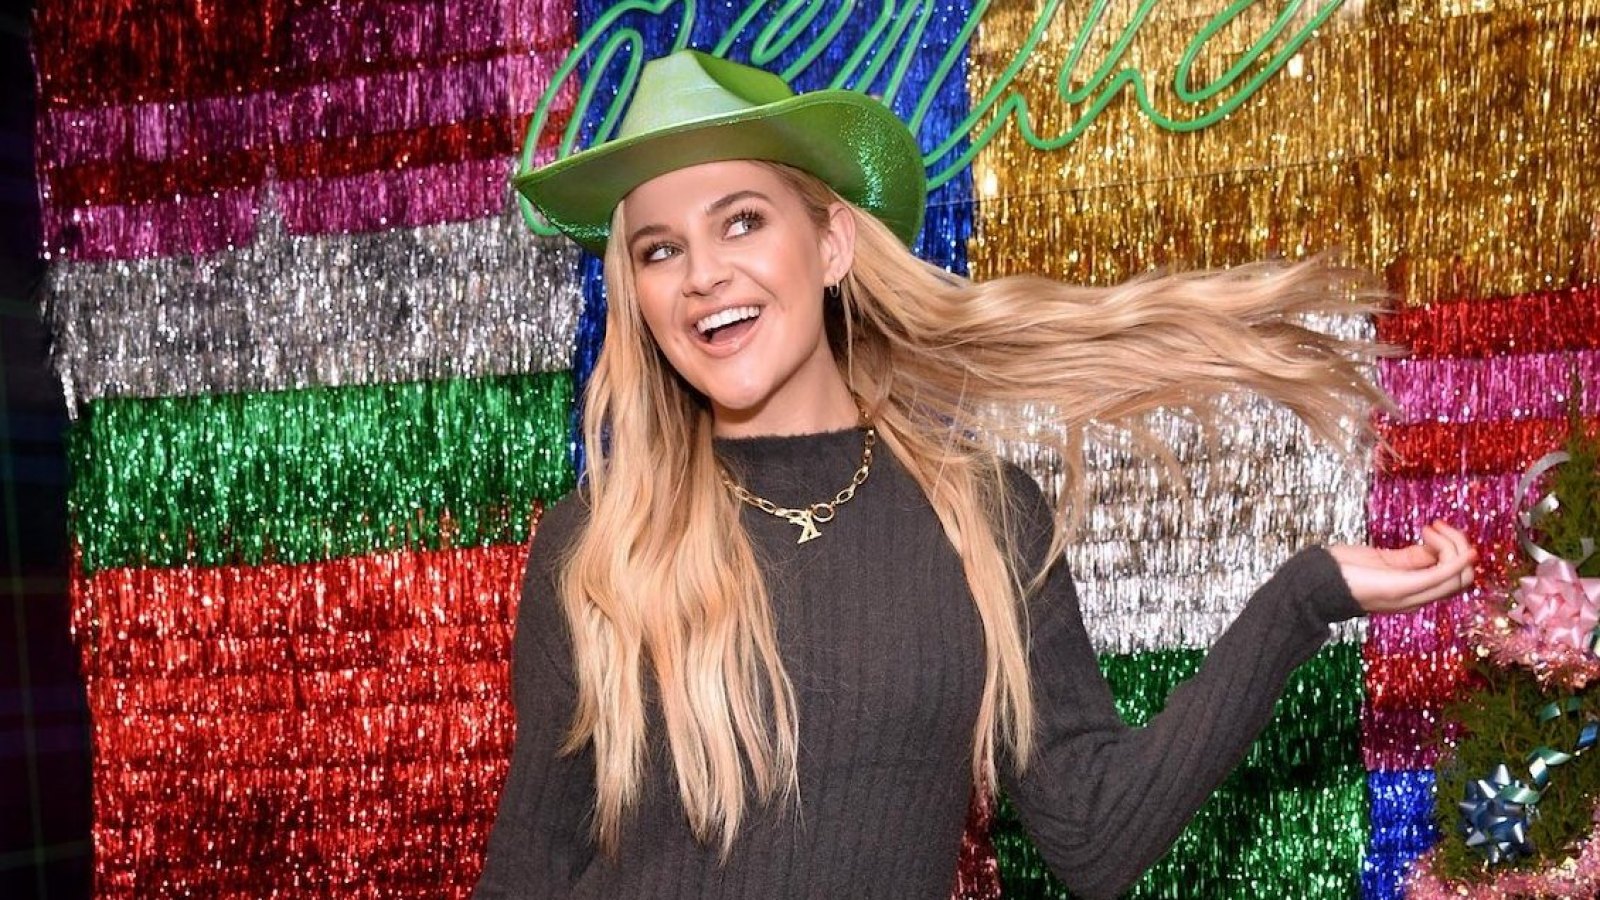 Kelsea Ballerini Has a ‘Lil Self Care Moment’ to End 2022